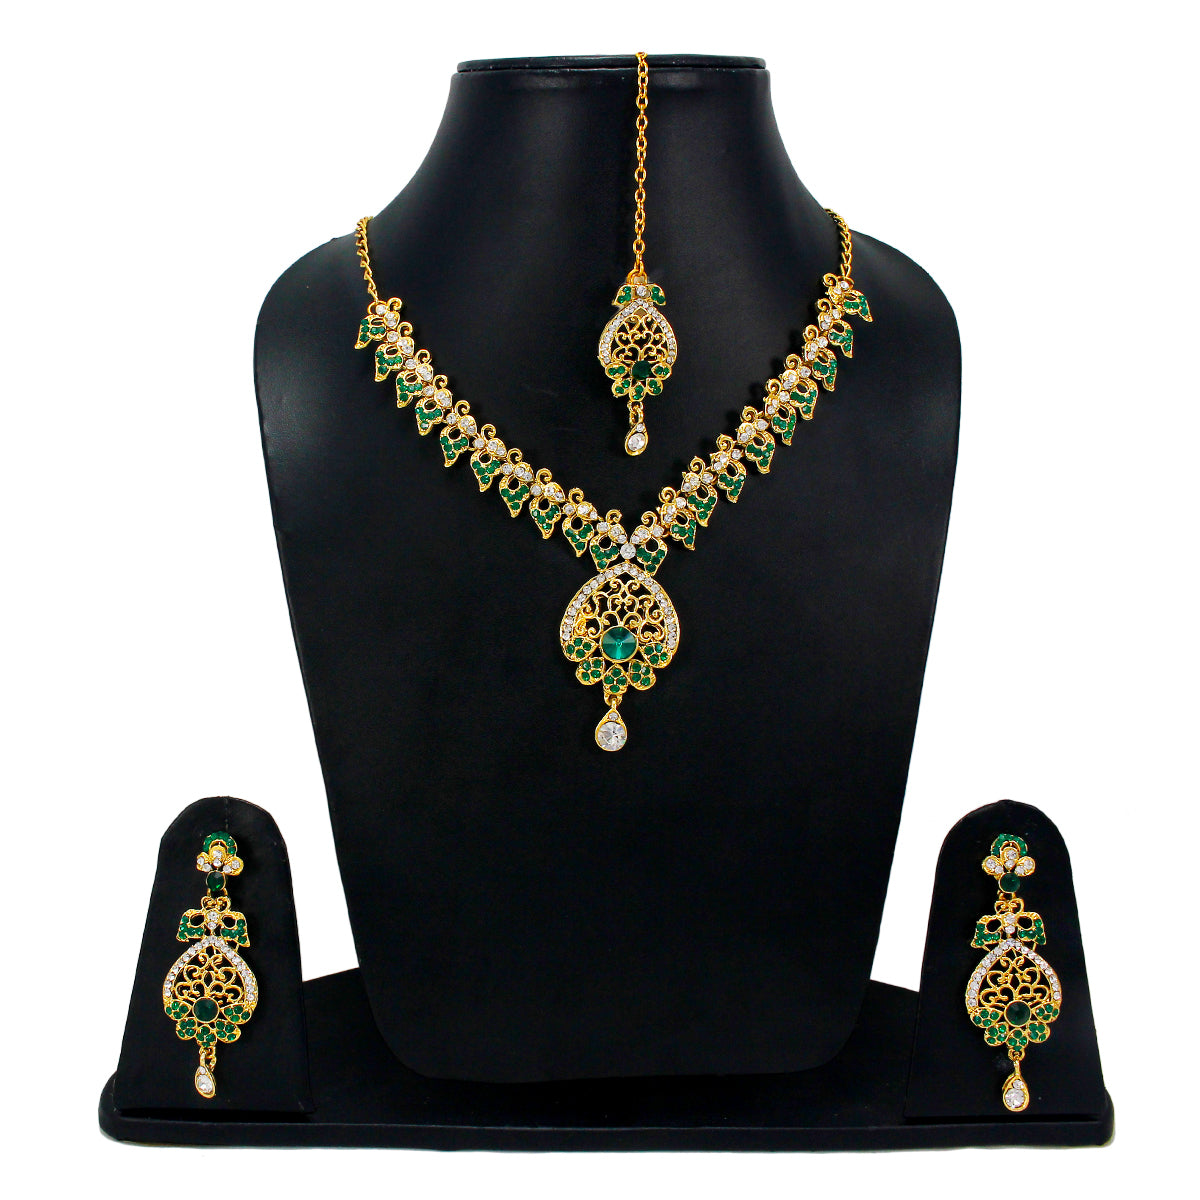 Royal Designer Necklace and Earrings with White Crystal Stones